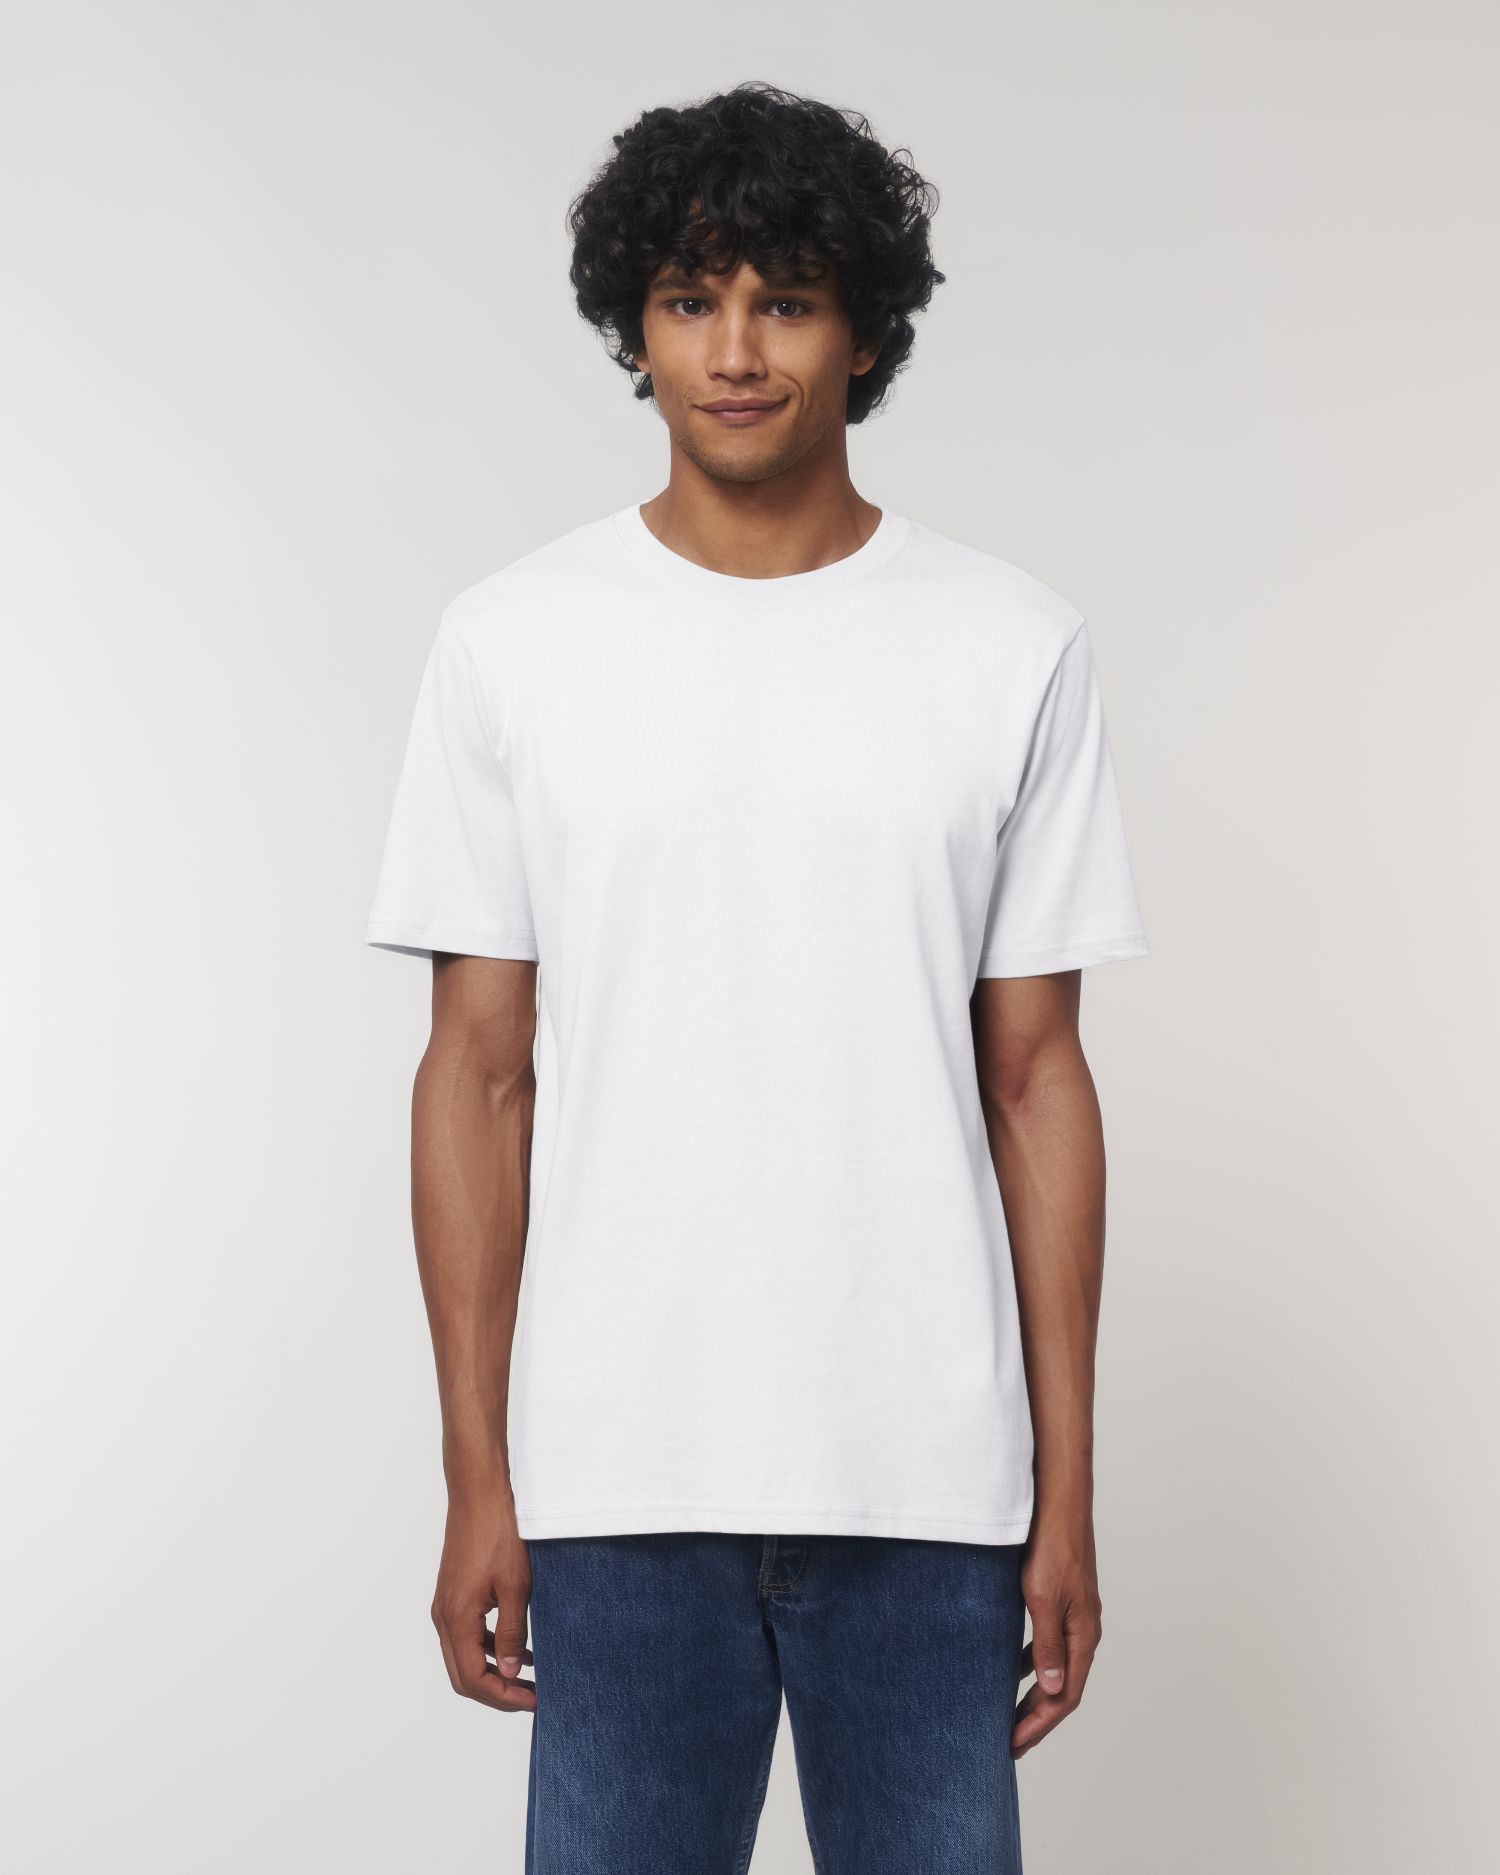 T-Shirt Stanley Sparker in Farbe White